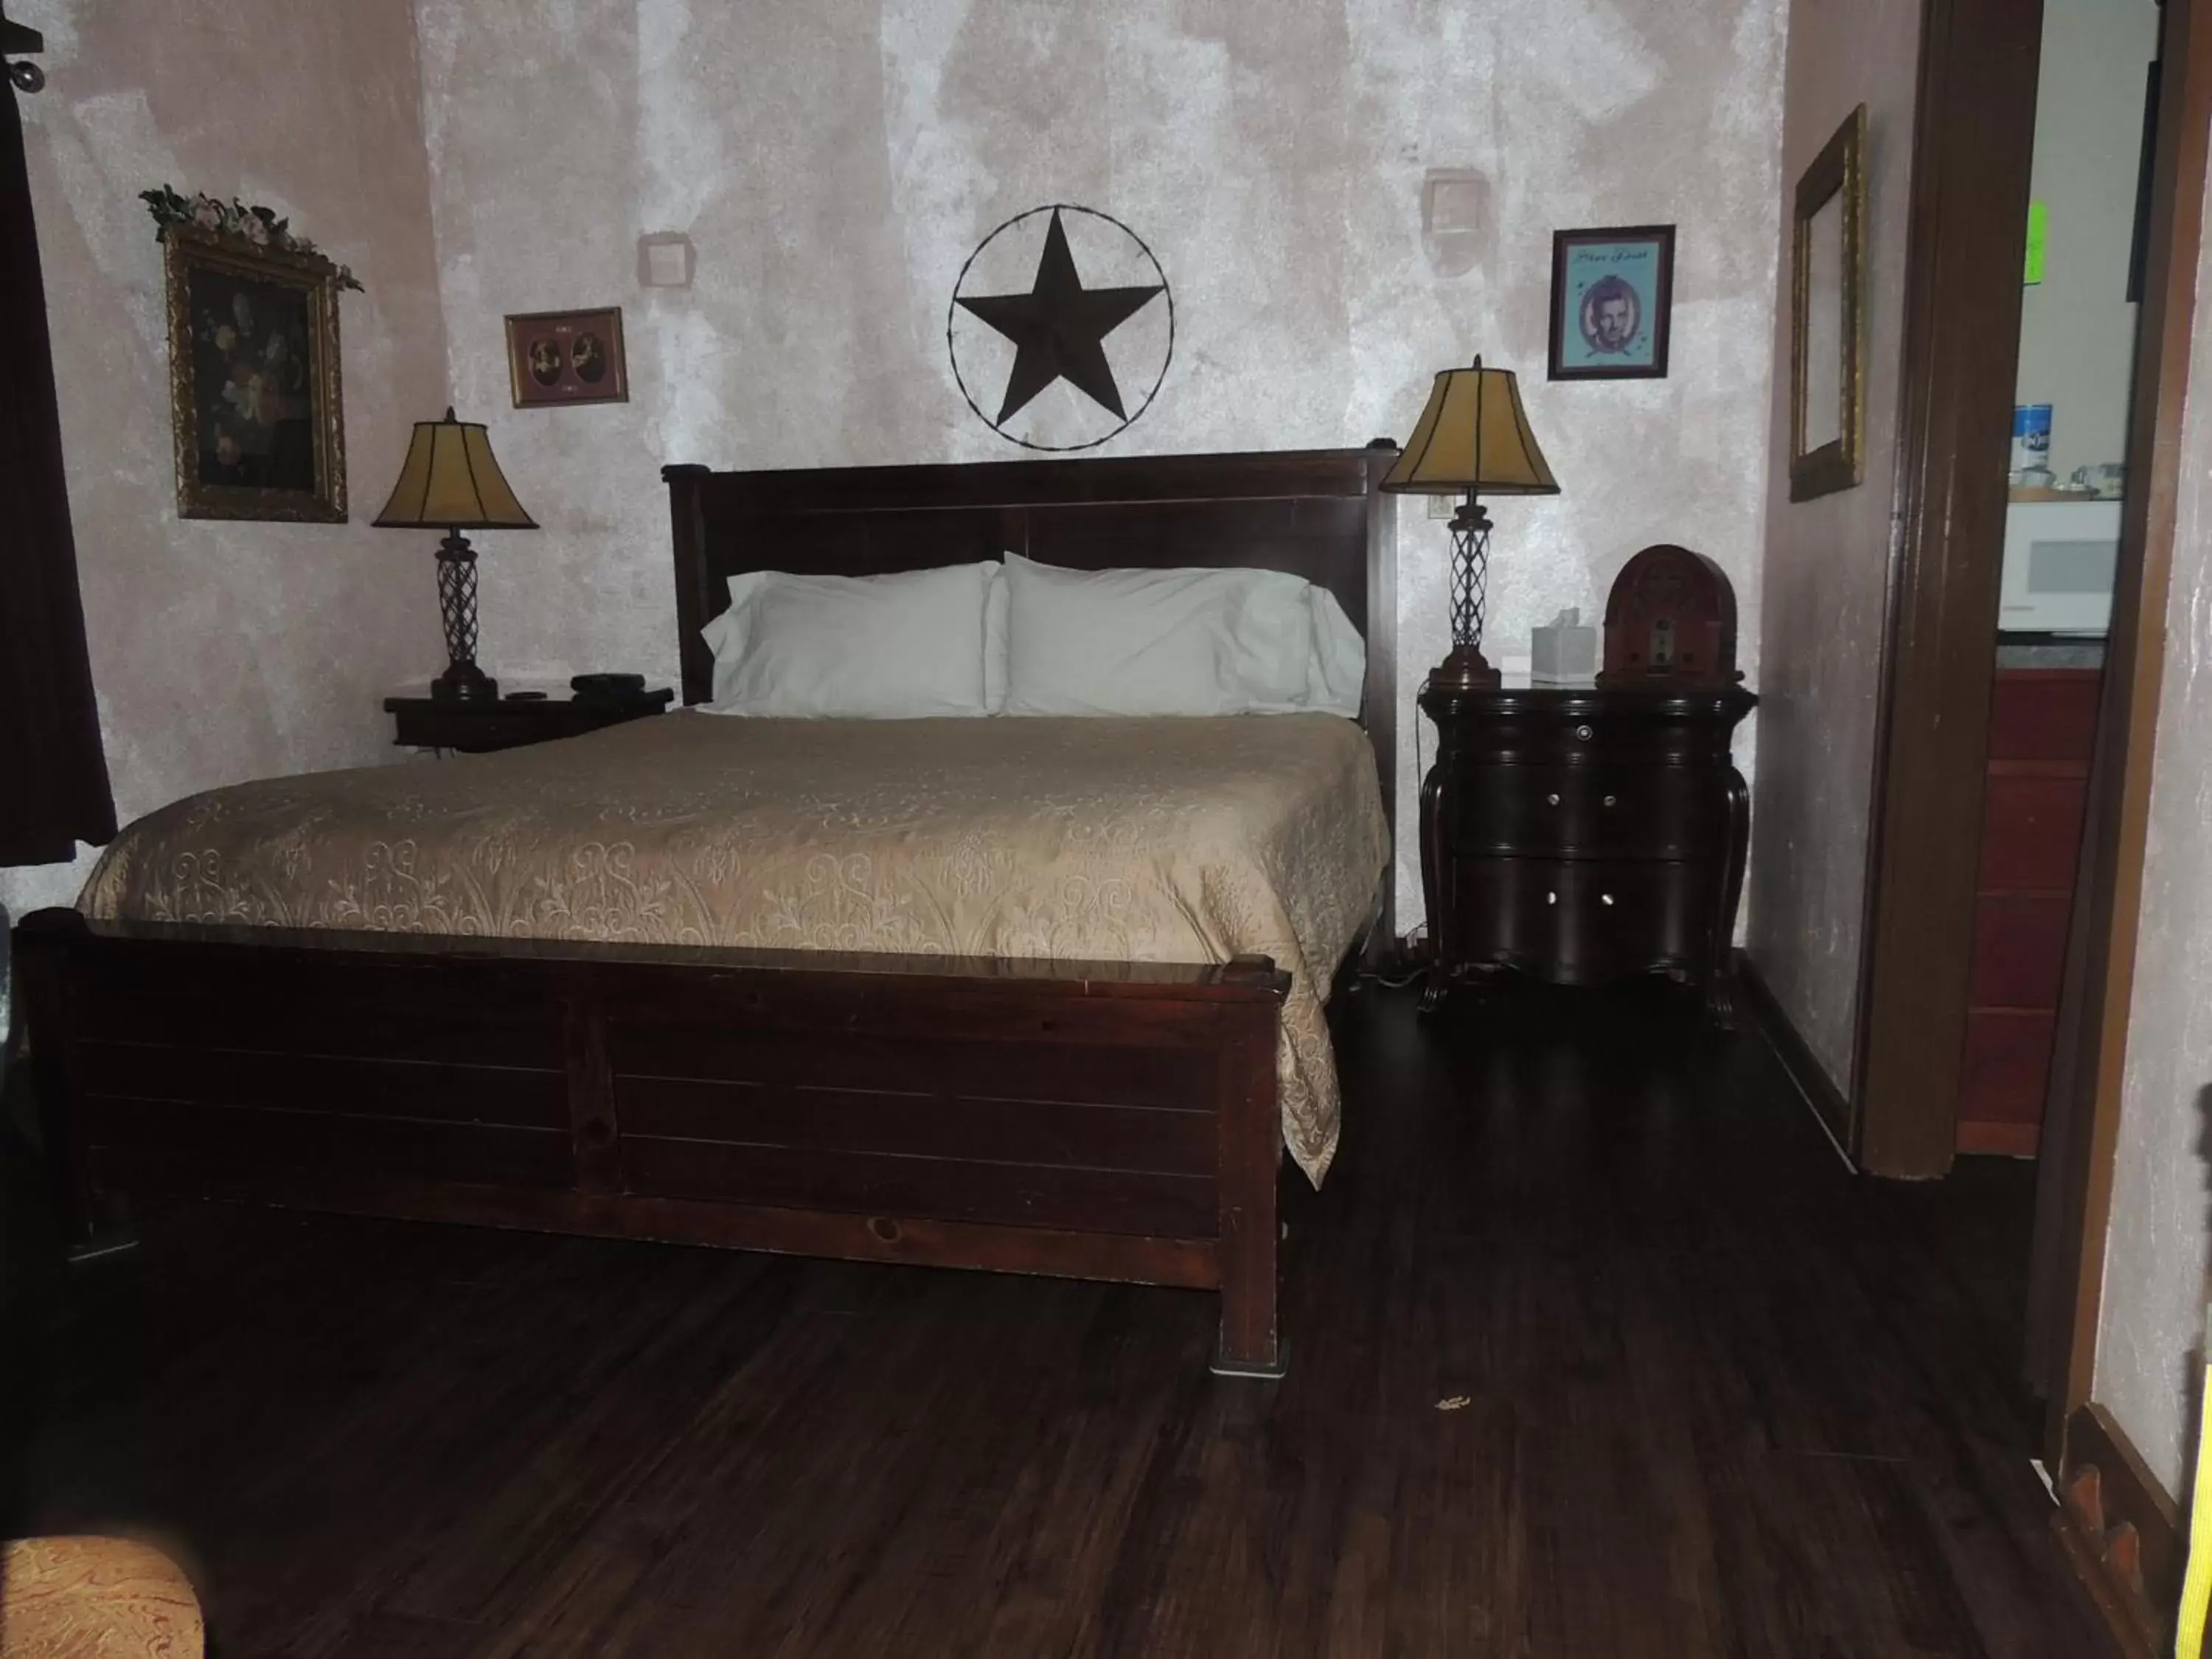 Bed in The Whispering Pines Inn